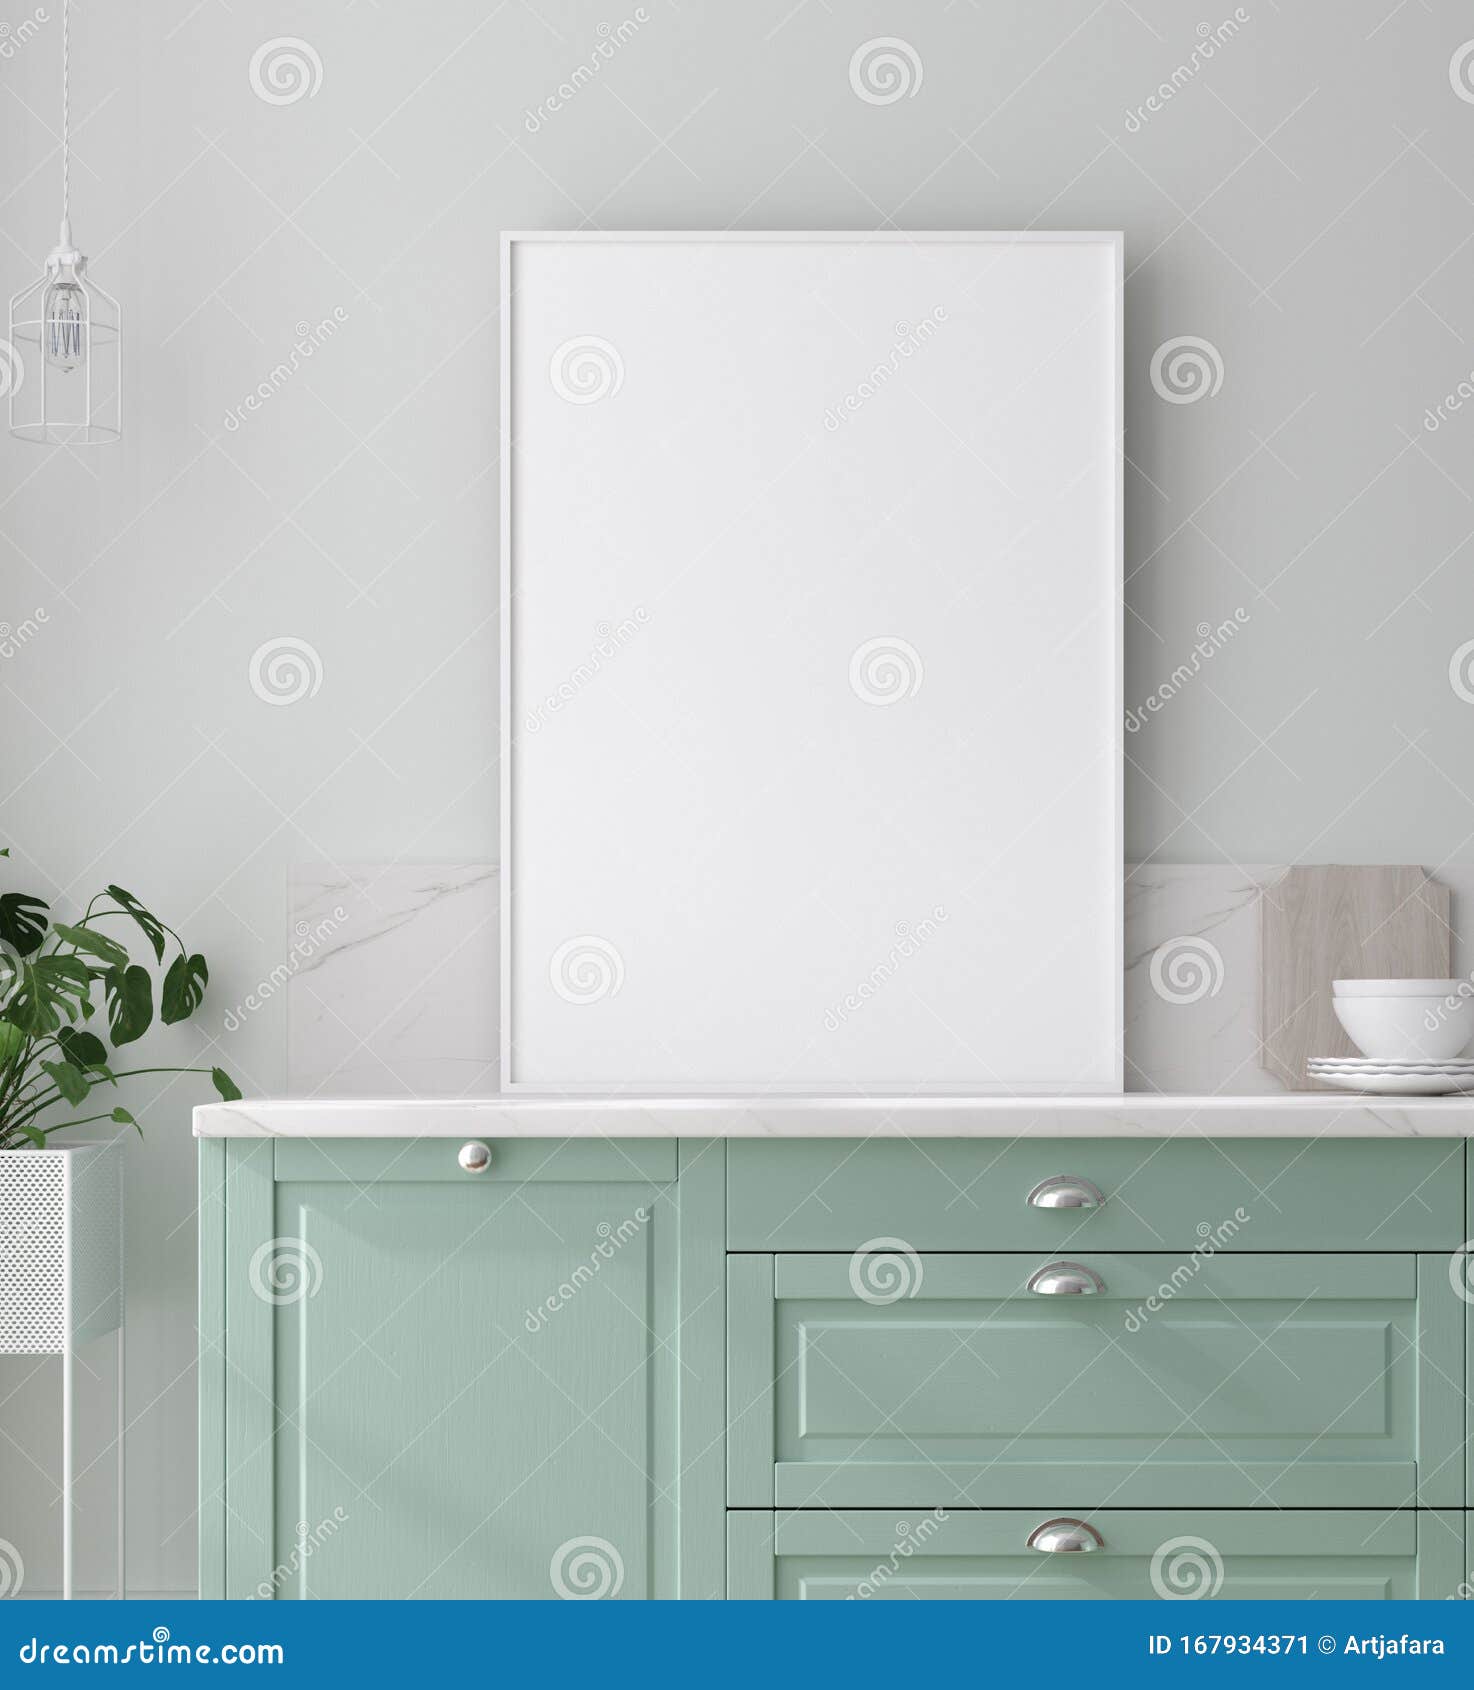 kitchen in neo mint color, wall poster mock up